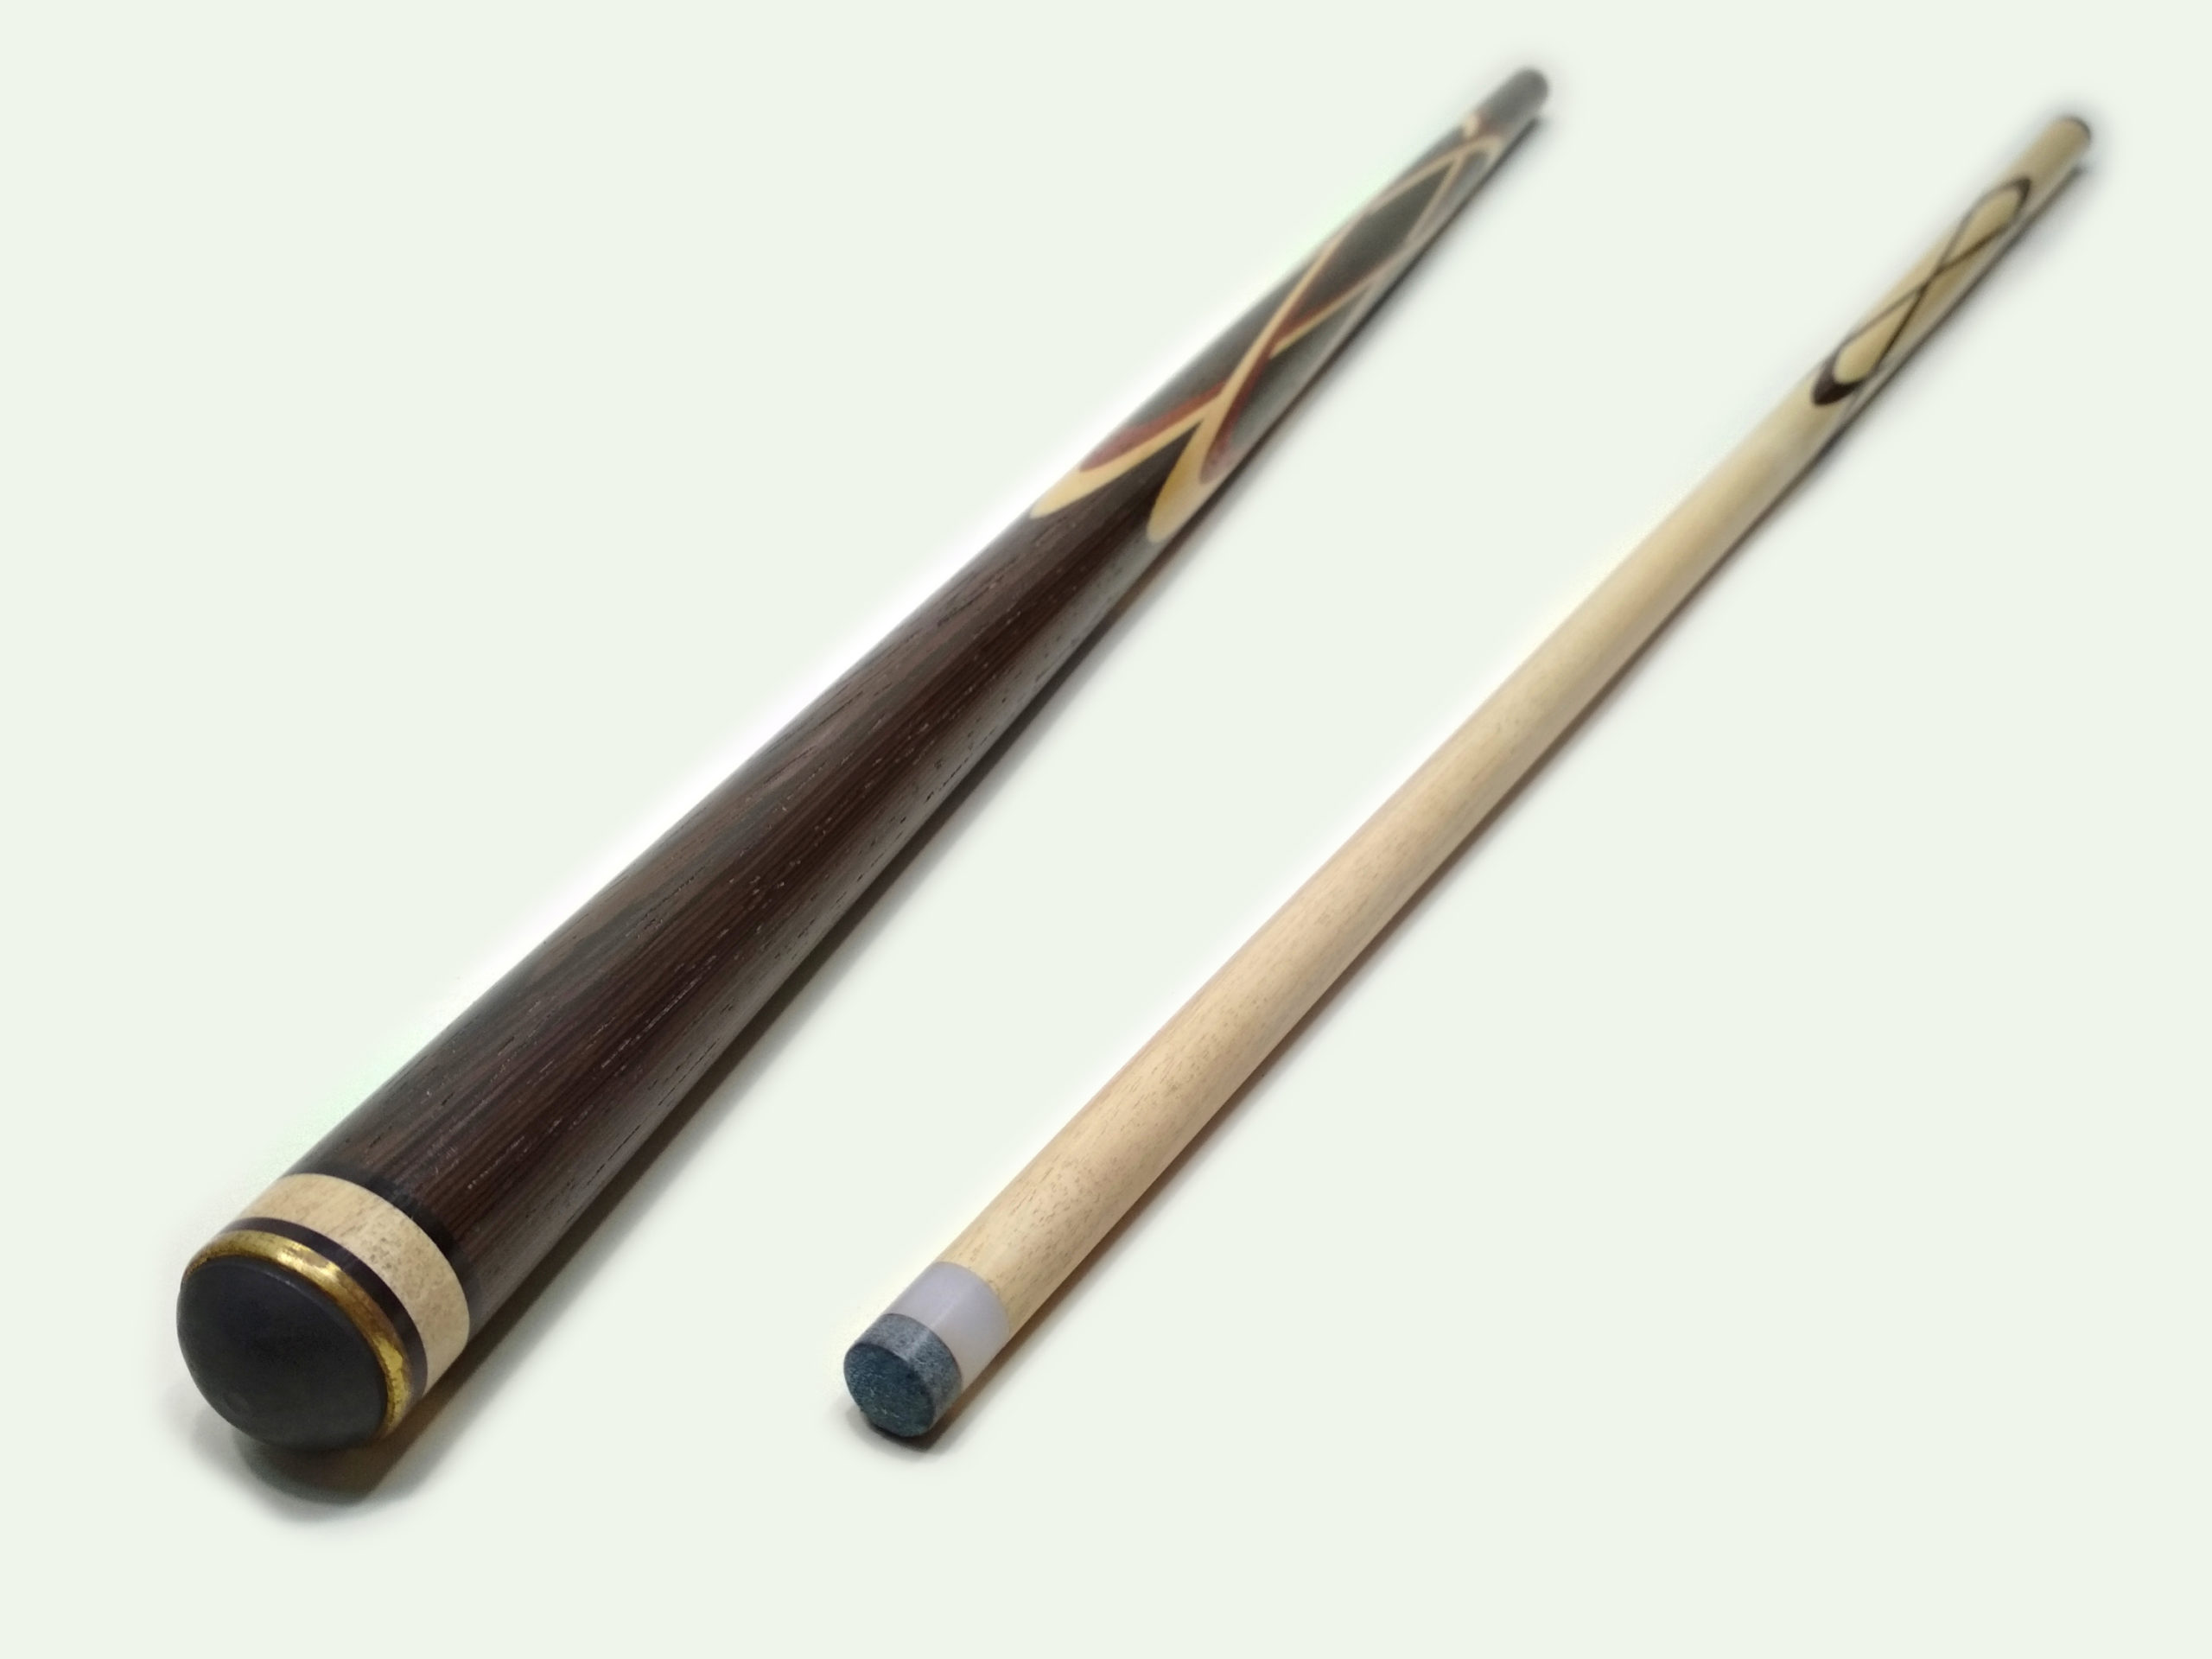 Details about   NEW Billiard cue stick Pool Cue  Hand spliced Shaft  Russian Cue  FULL-SPLICED 